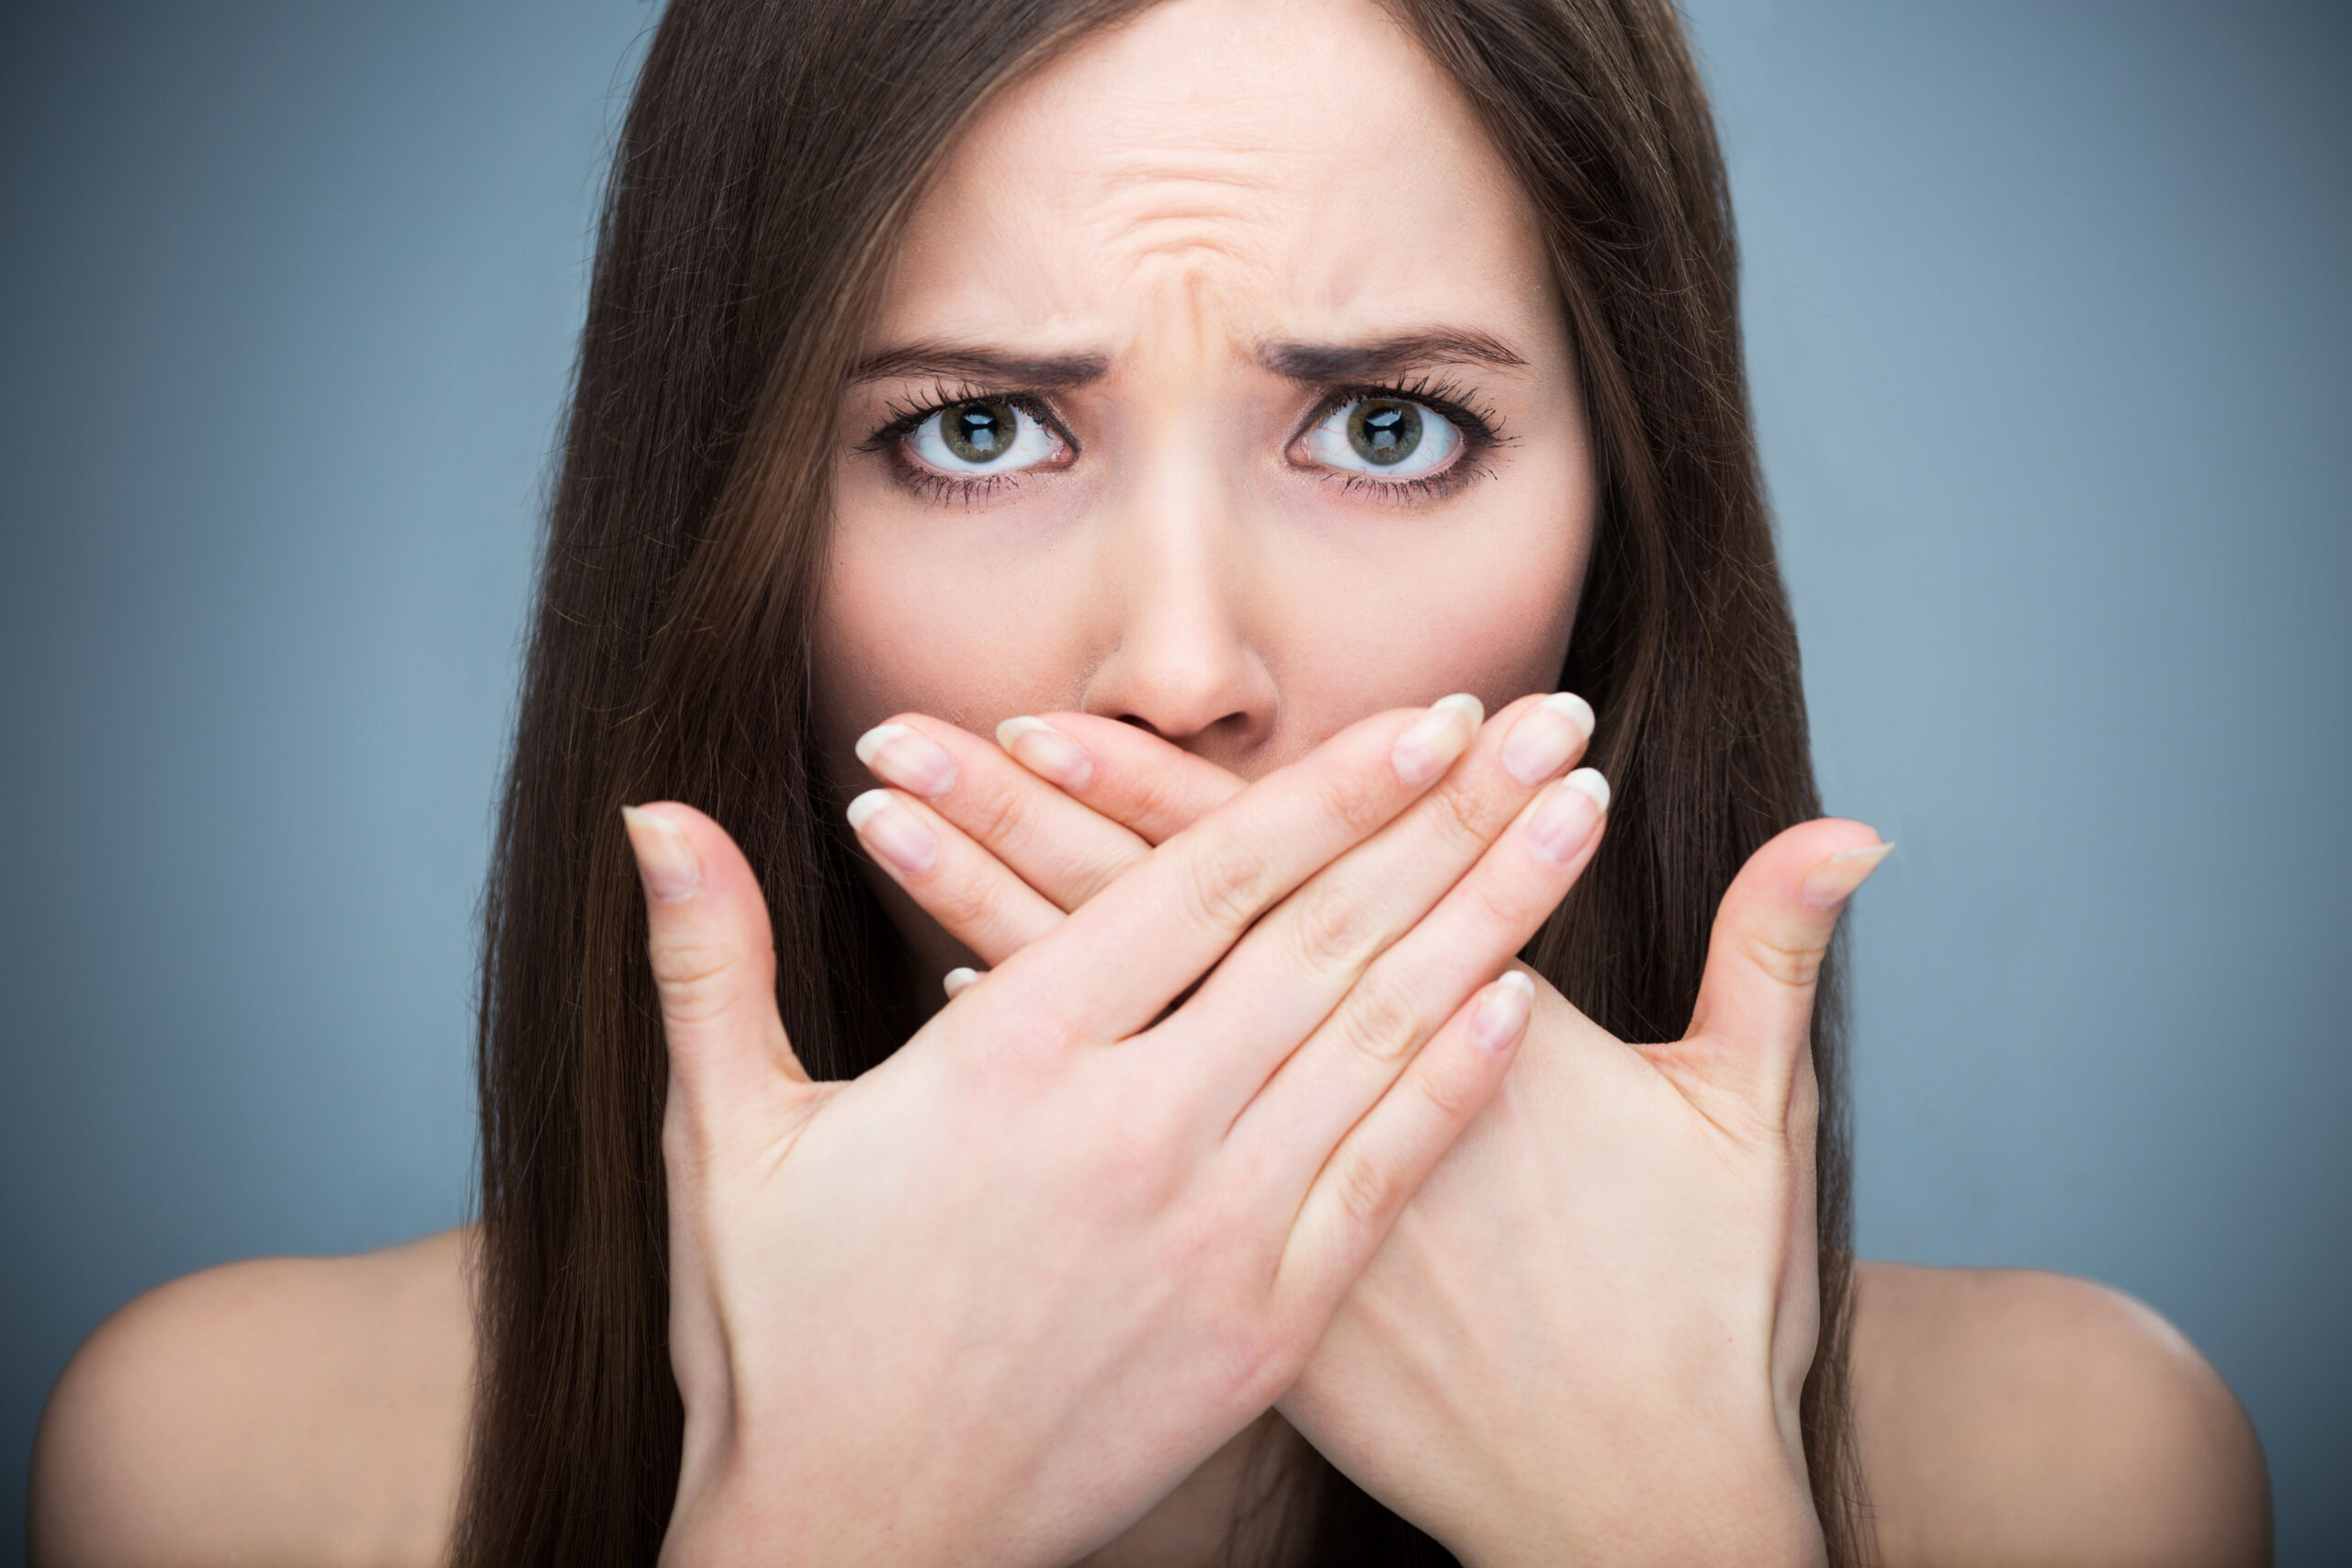 Brunette woman covering her mouth with both hands